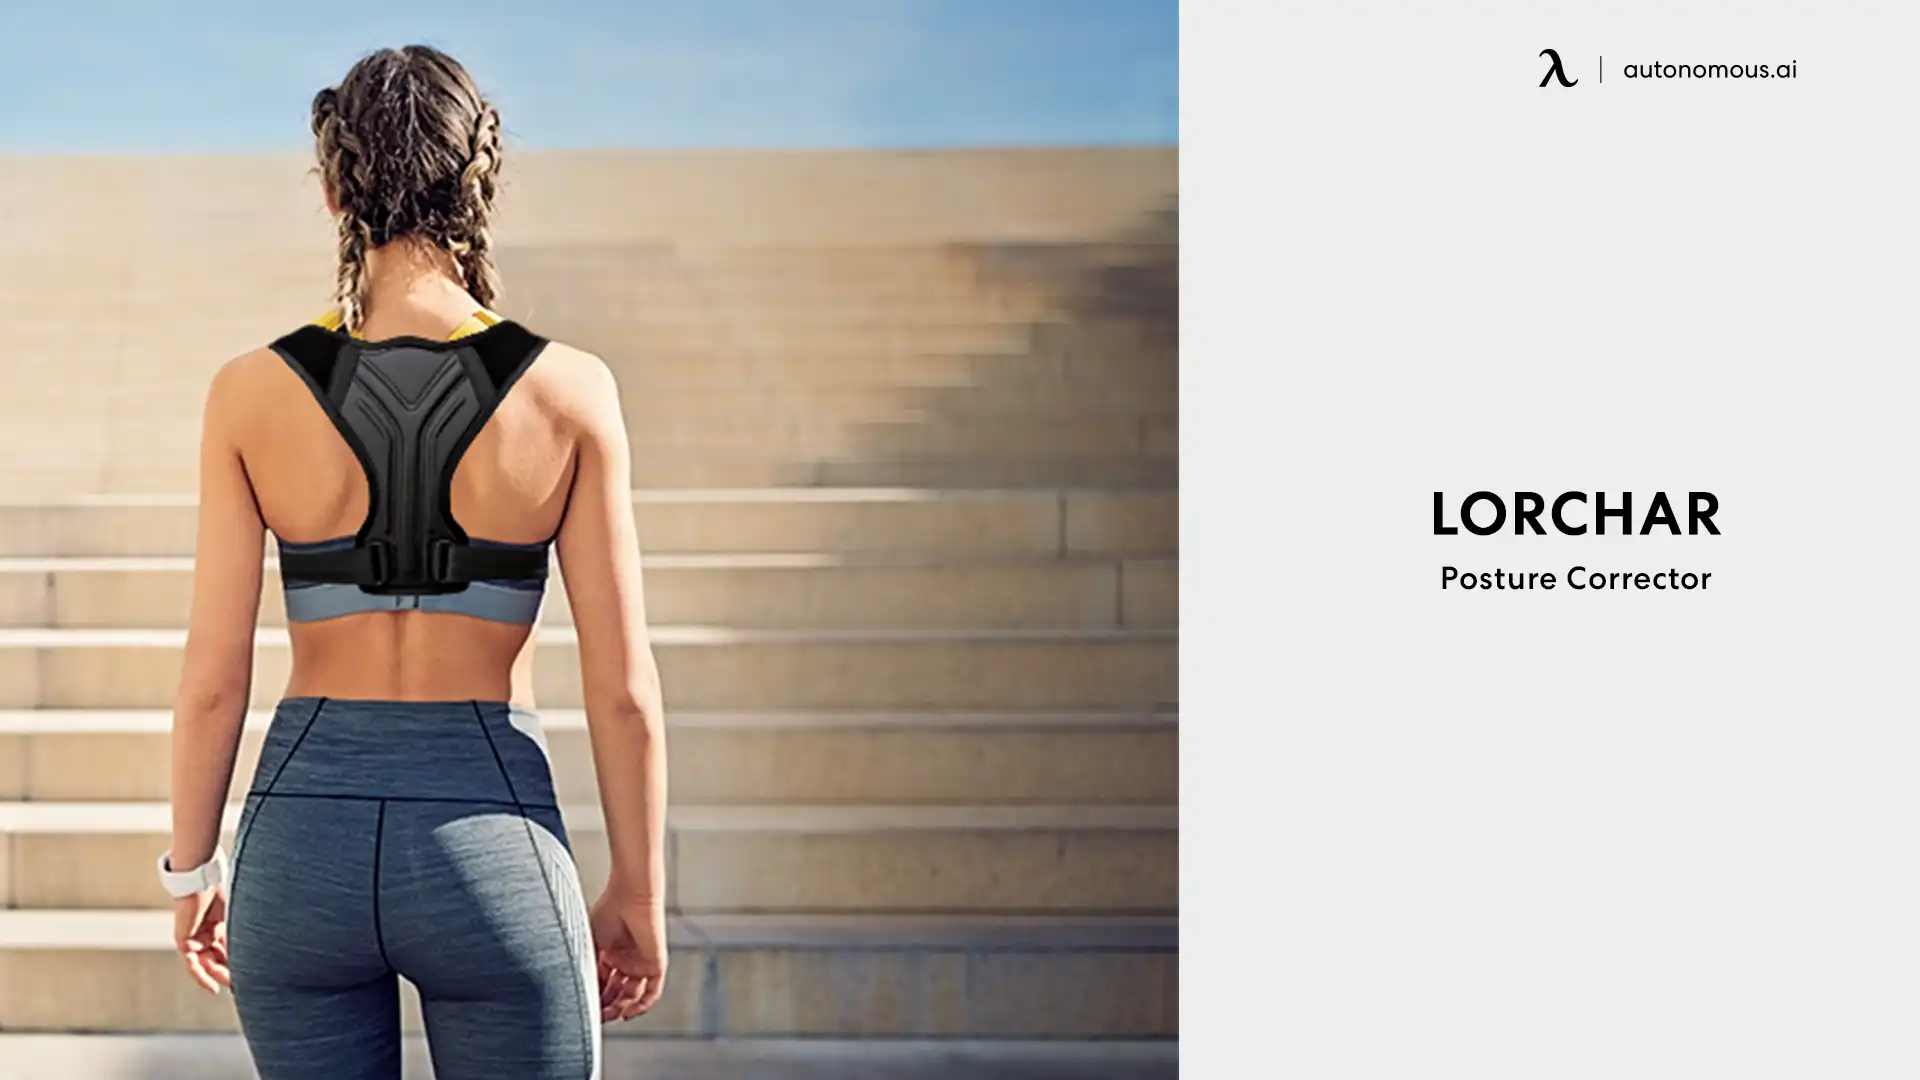 Lorchar's Posture Corrector for Men and Women